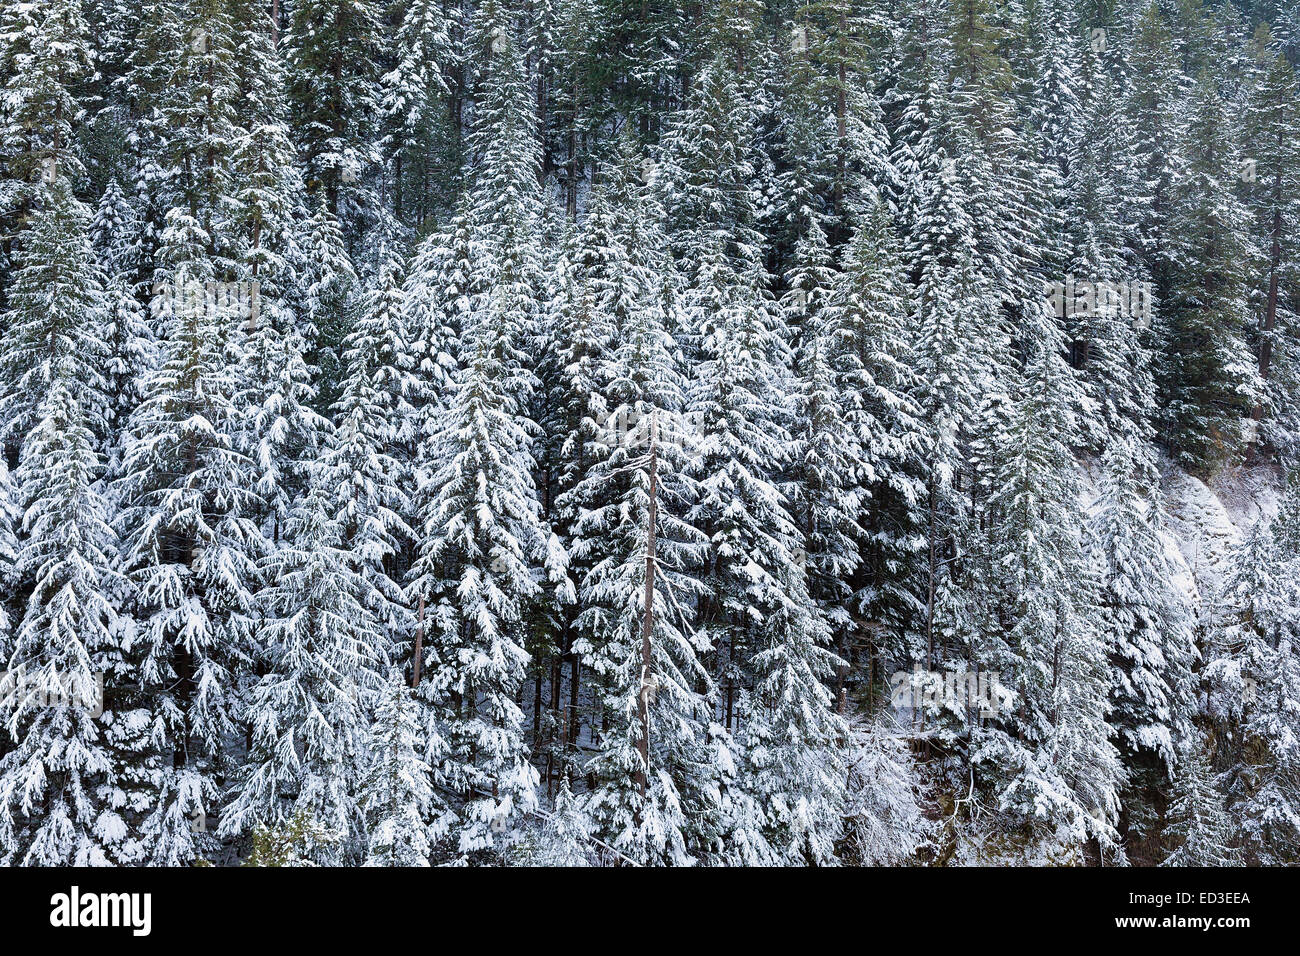 Snow Covered Evergreen Fir Trees at the Columbia River Gorge in Oregon during Winter Season Stock Photo